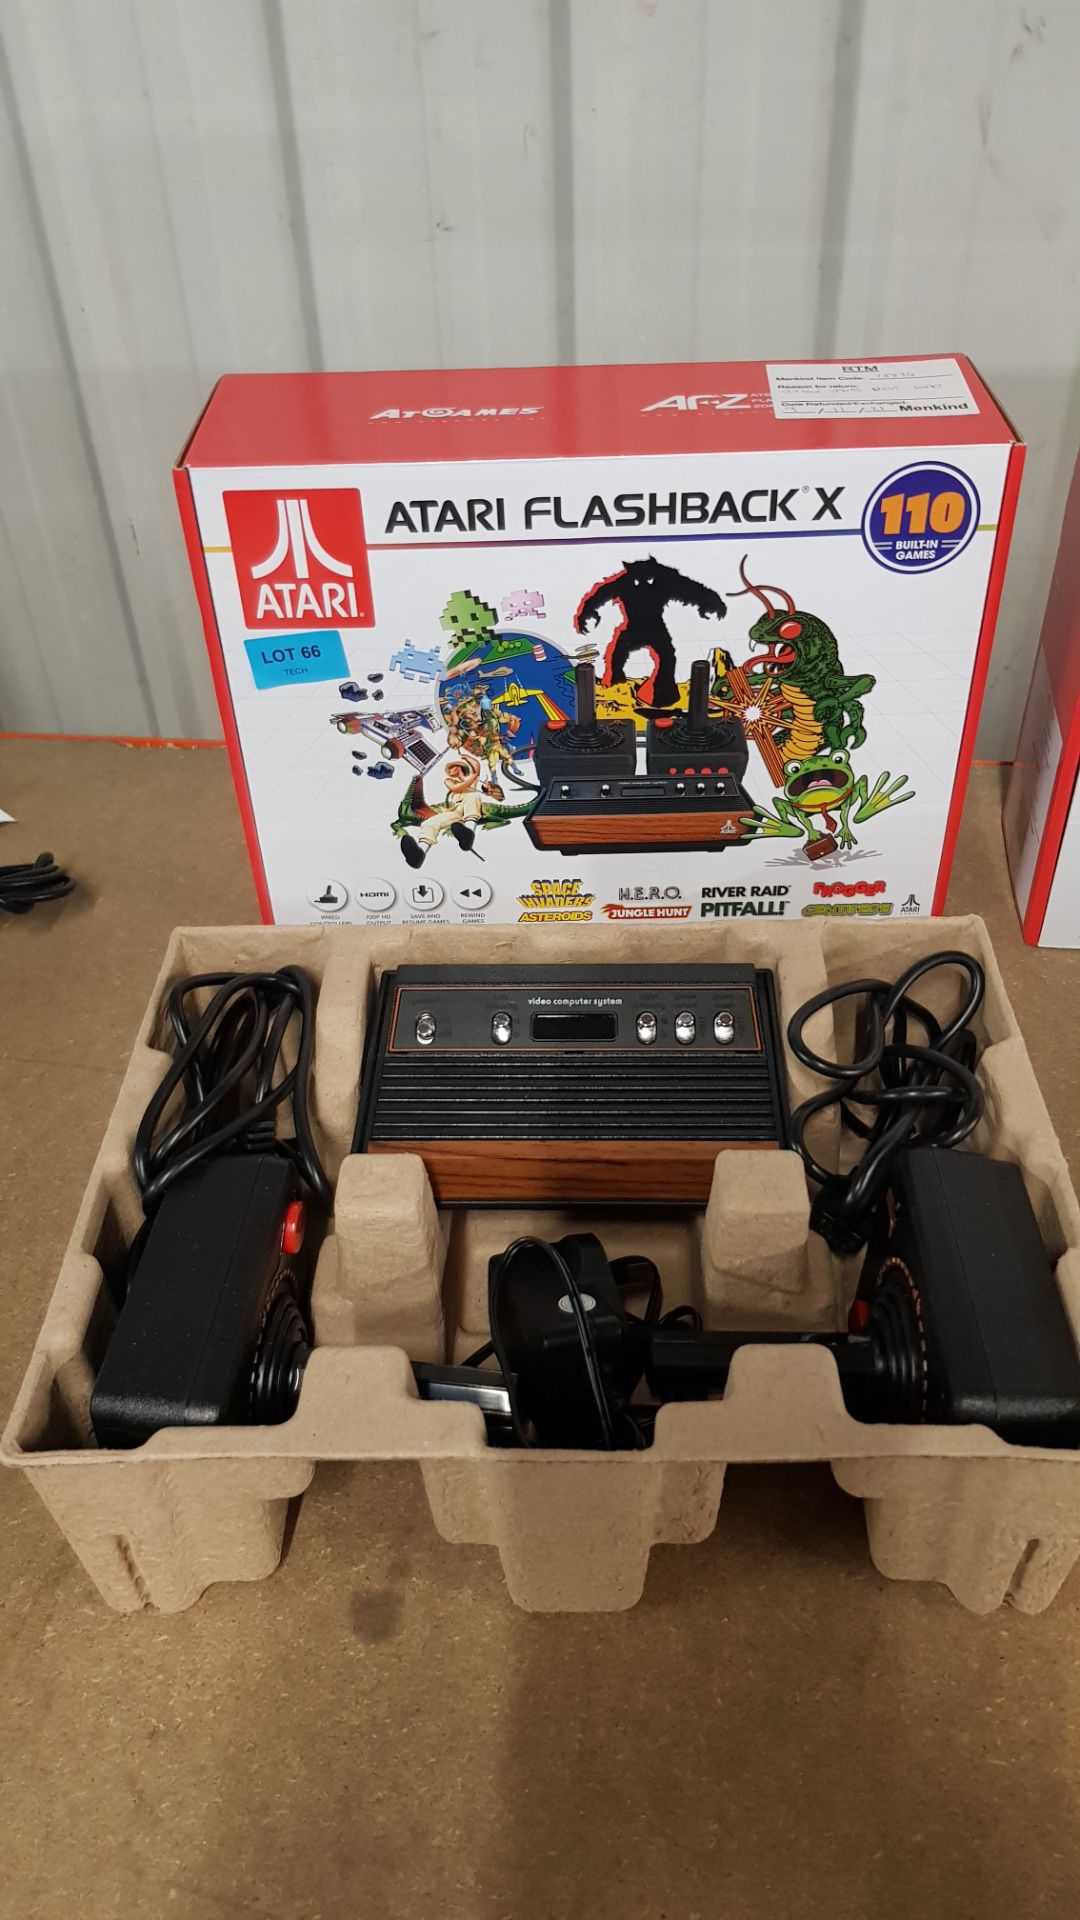 (11B) RRP £75. Atari Flashback X Retro Console With 110 Games. (Unit Has Return To Manufacturer... - Image 6 of 12